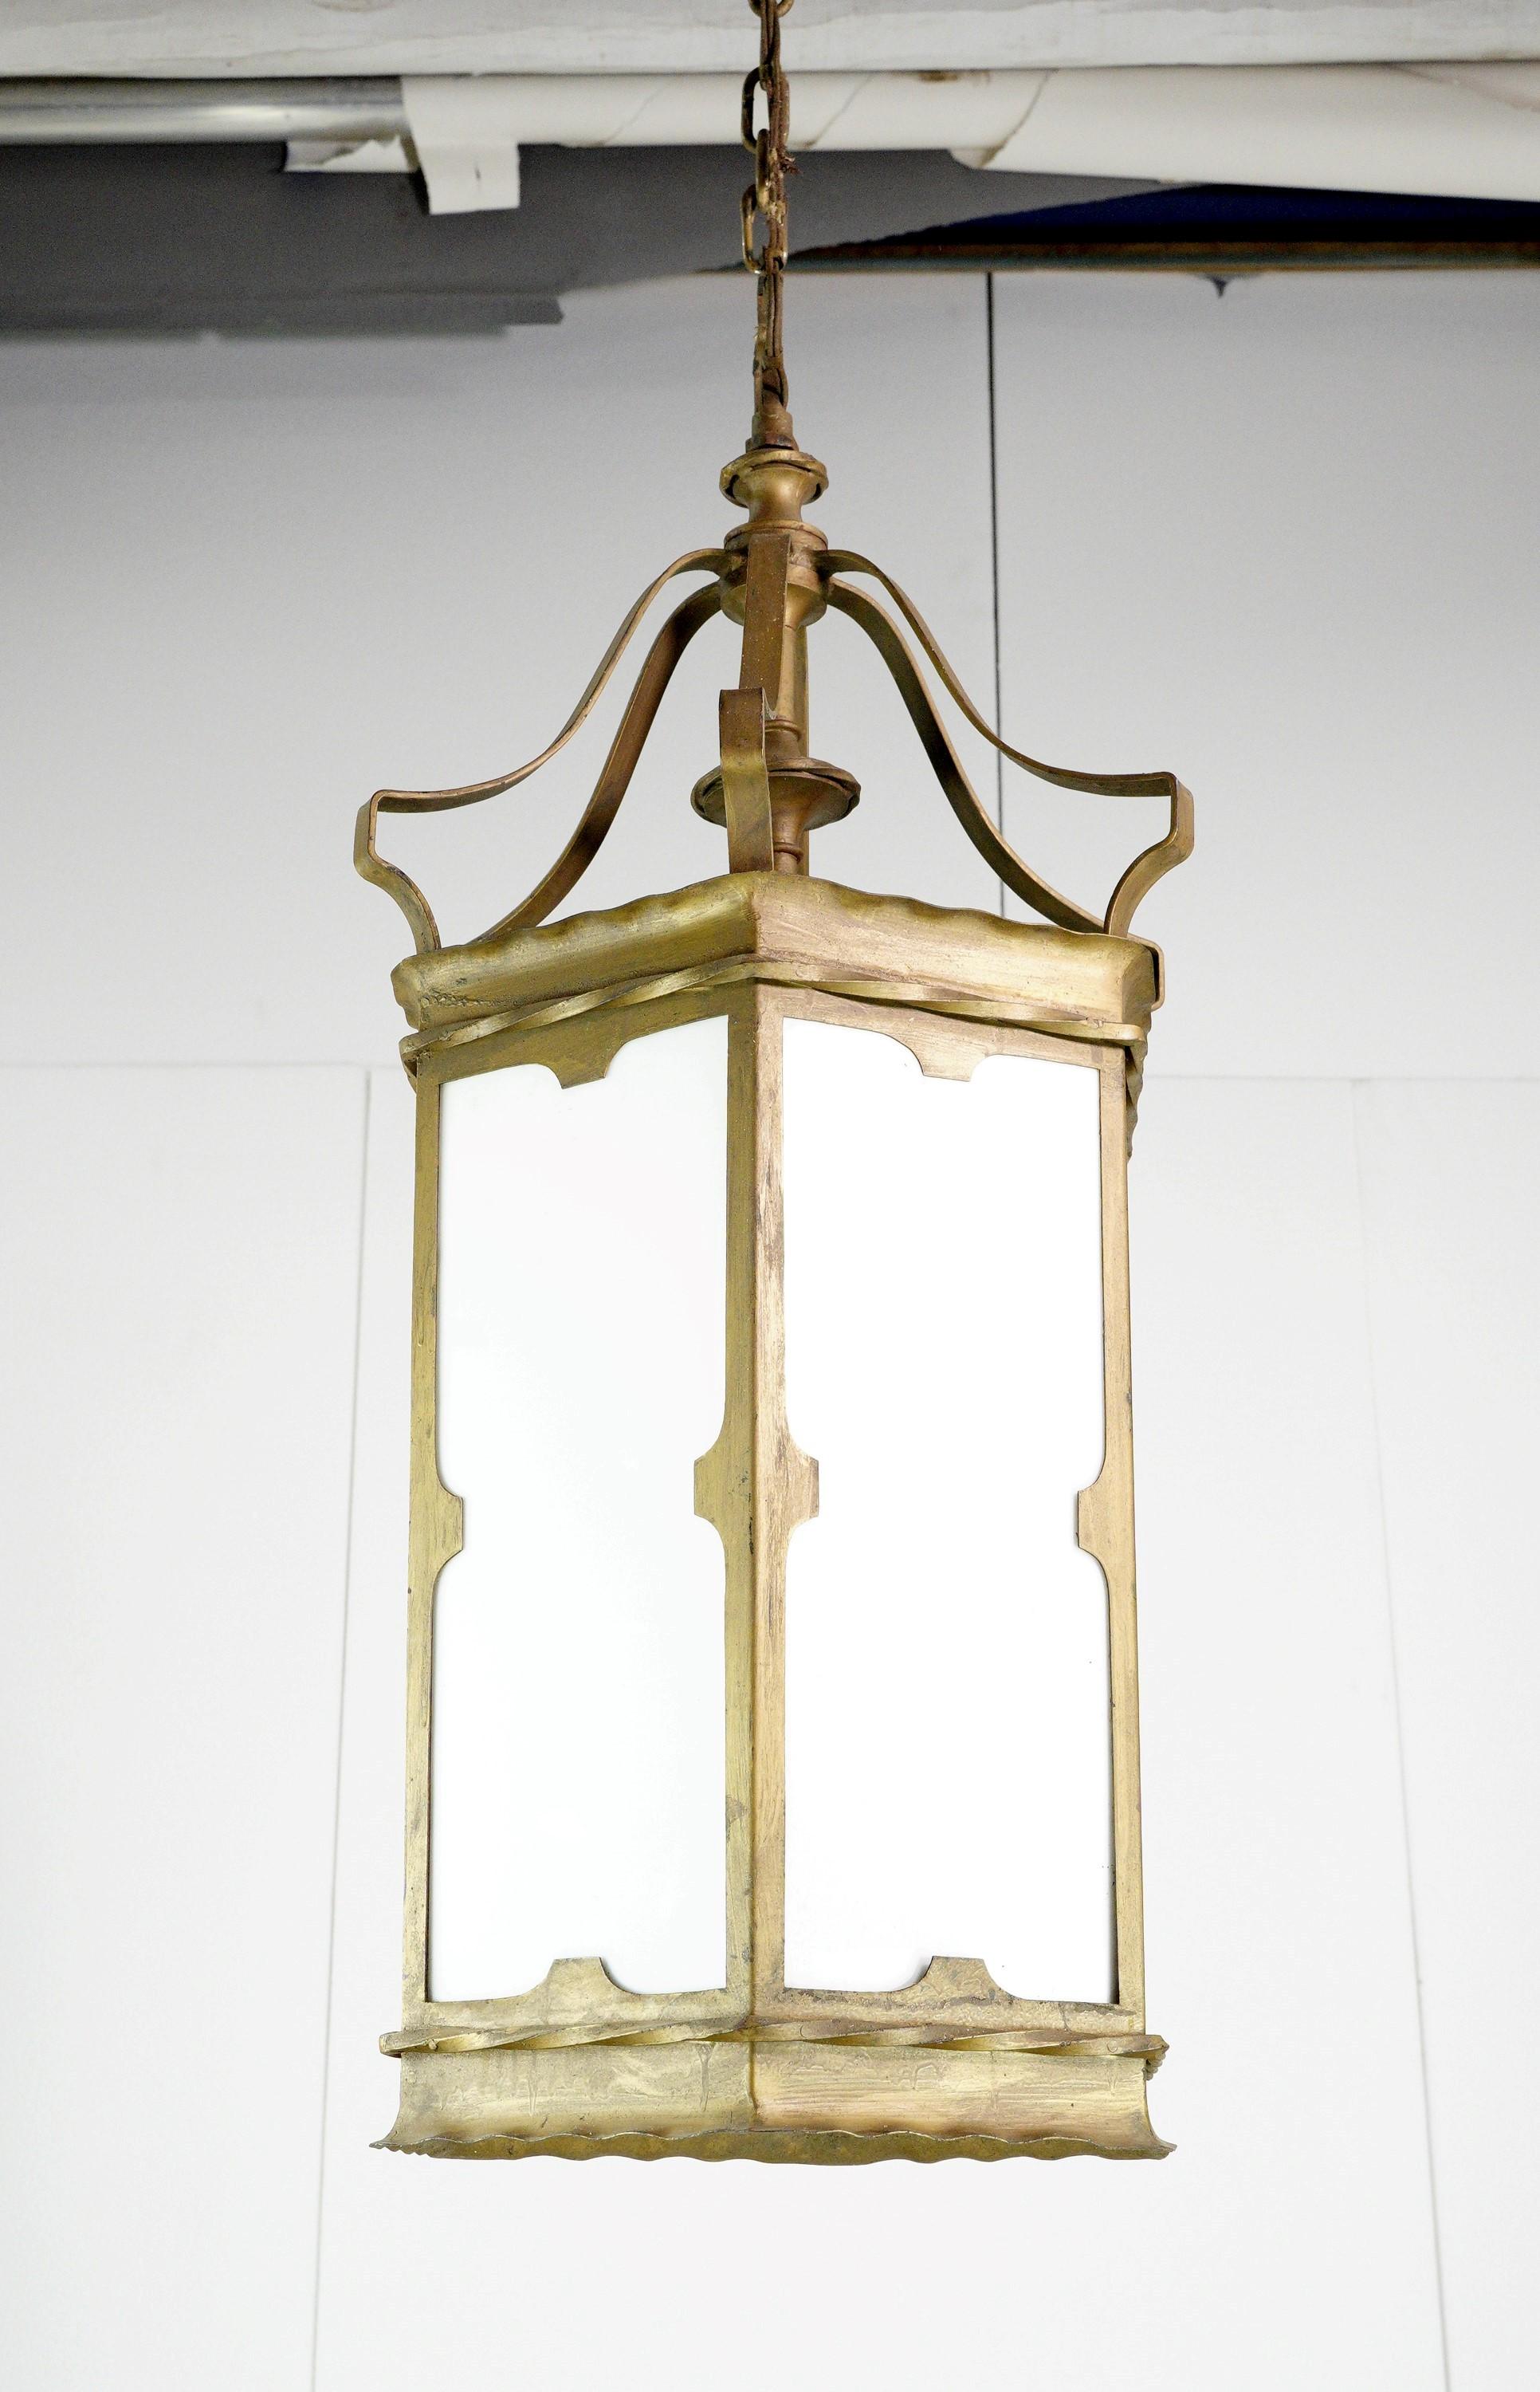 Early 20th Century pendant lantern with white glass panels and a gold painted steel frame. This lantern has four standard bulbs. Cleaned and restored. This will be cleaned and rewired before shipping. Please note, this item is located in our